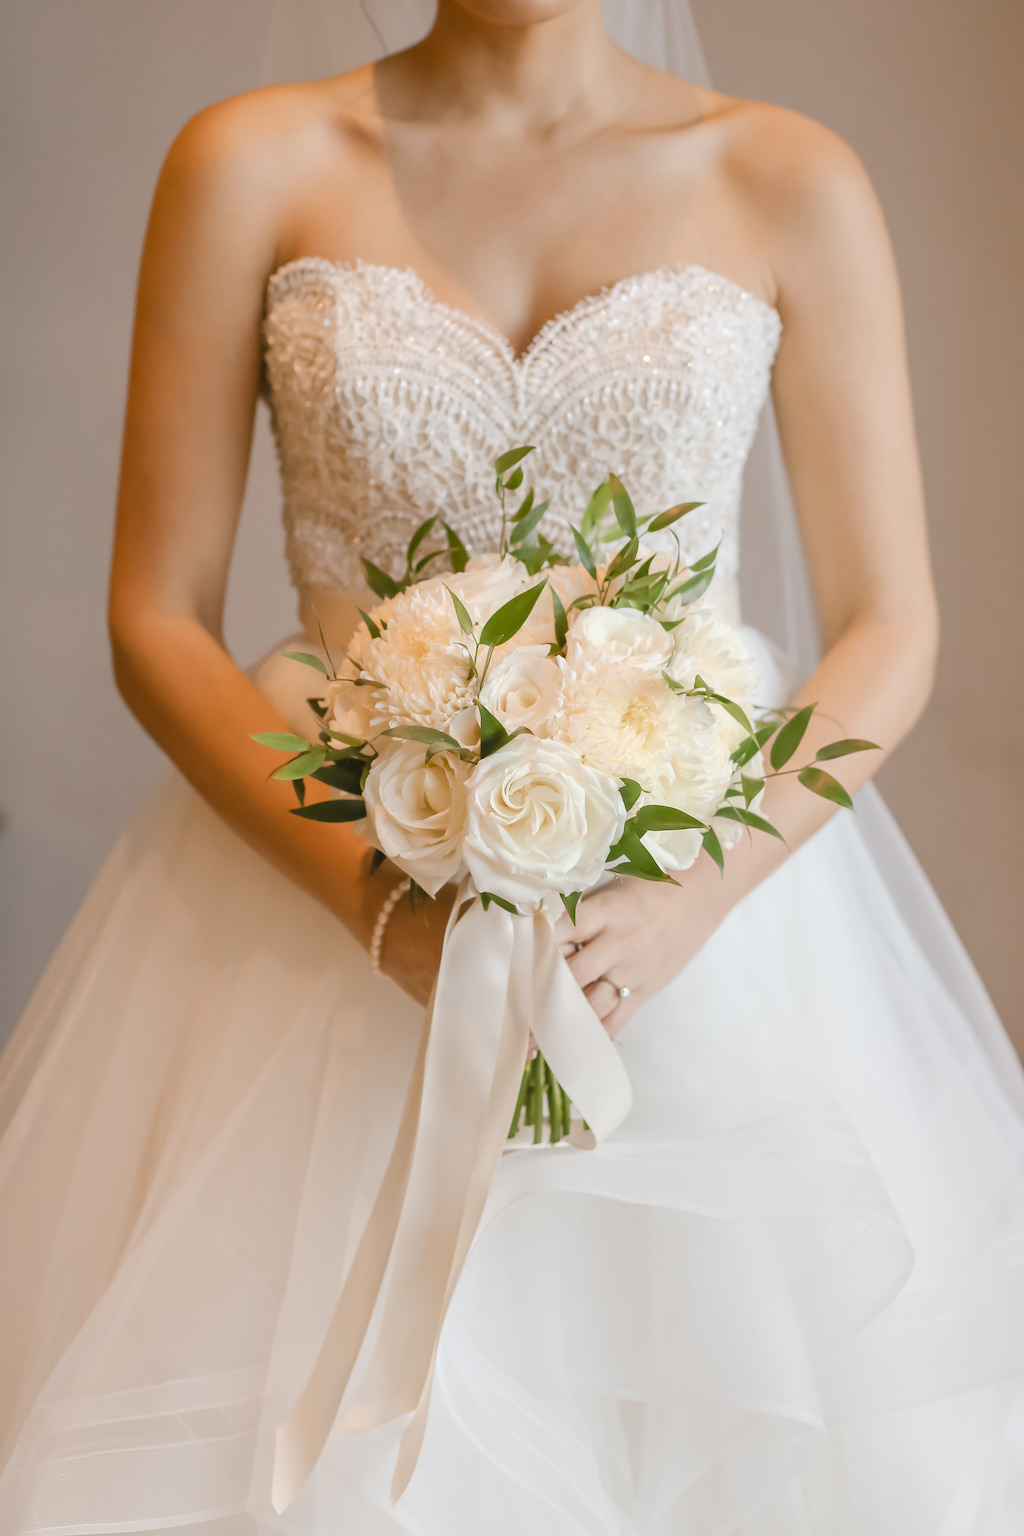 Florida Bride Getting Ready Wedding Portrait, Sweetheart Strapless Lace and Tulle Skirt Ballgown Wedding Dress with White and Greenery Floral Bouquet | Tampa Bay Wedding Photographer Lifelong Photography Studios